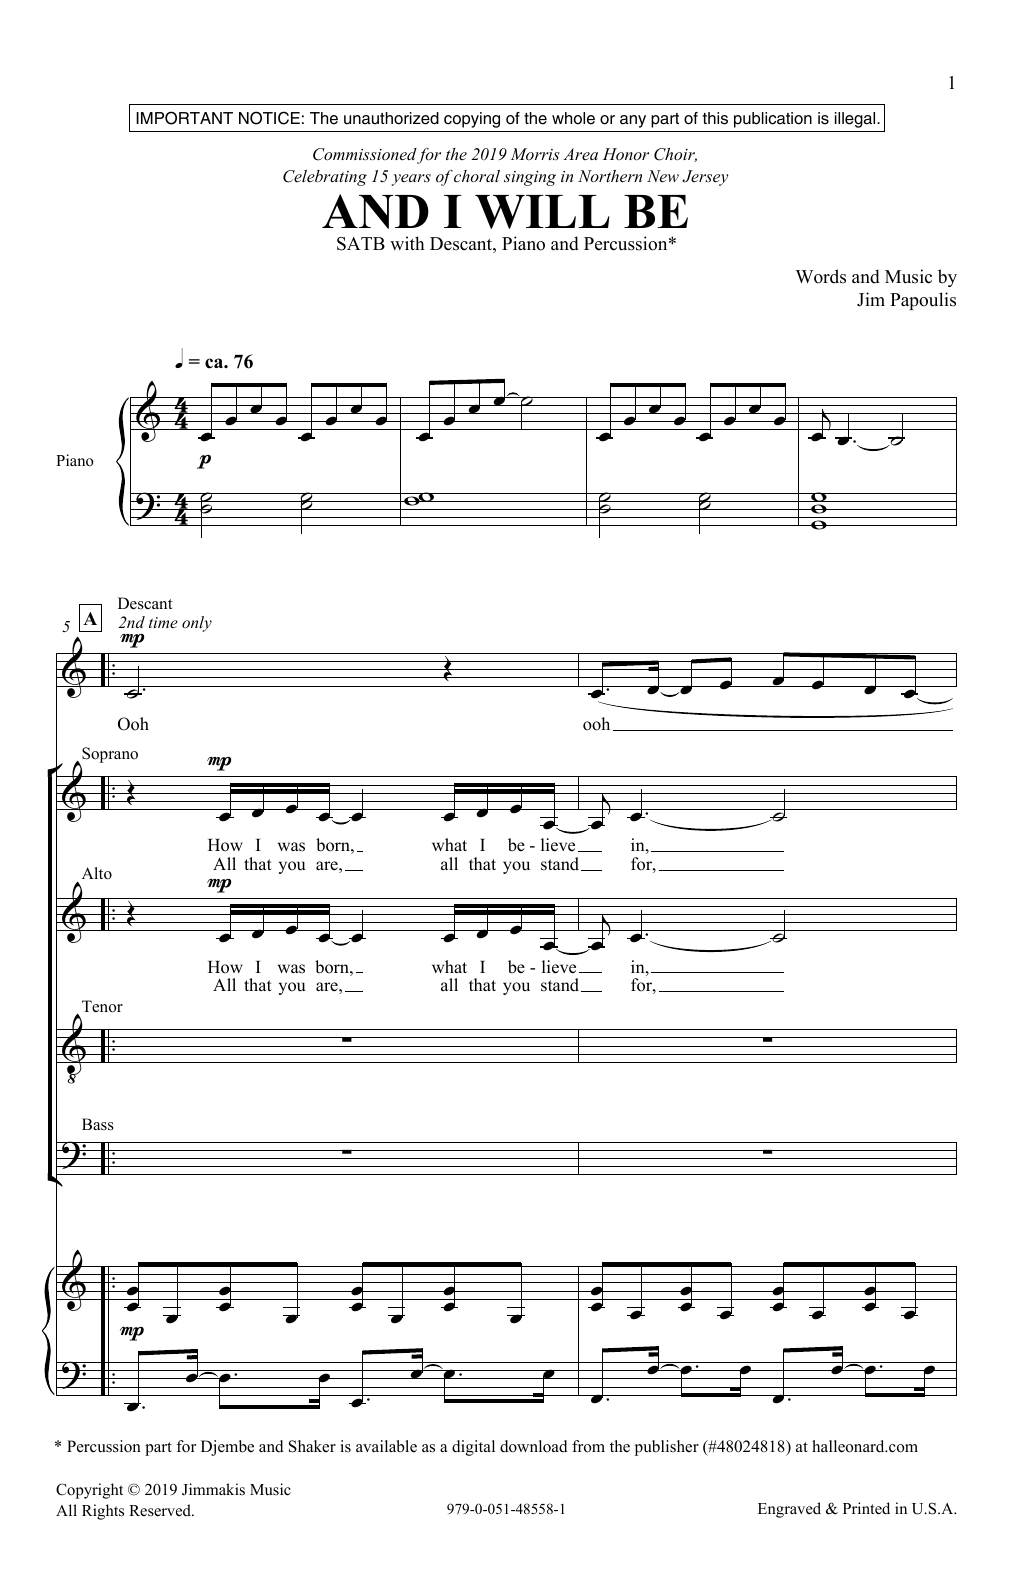 Download Jim Papoulis And I Will Be Sheet Music